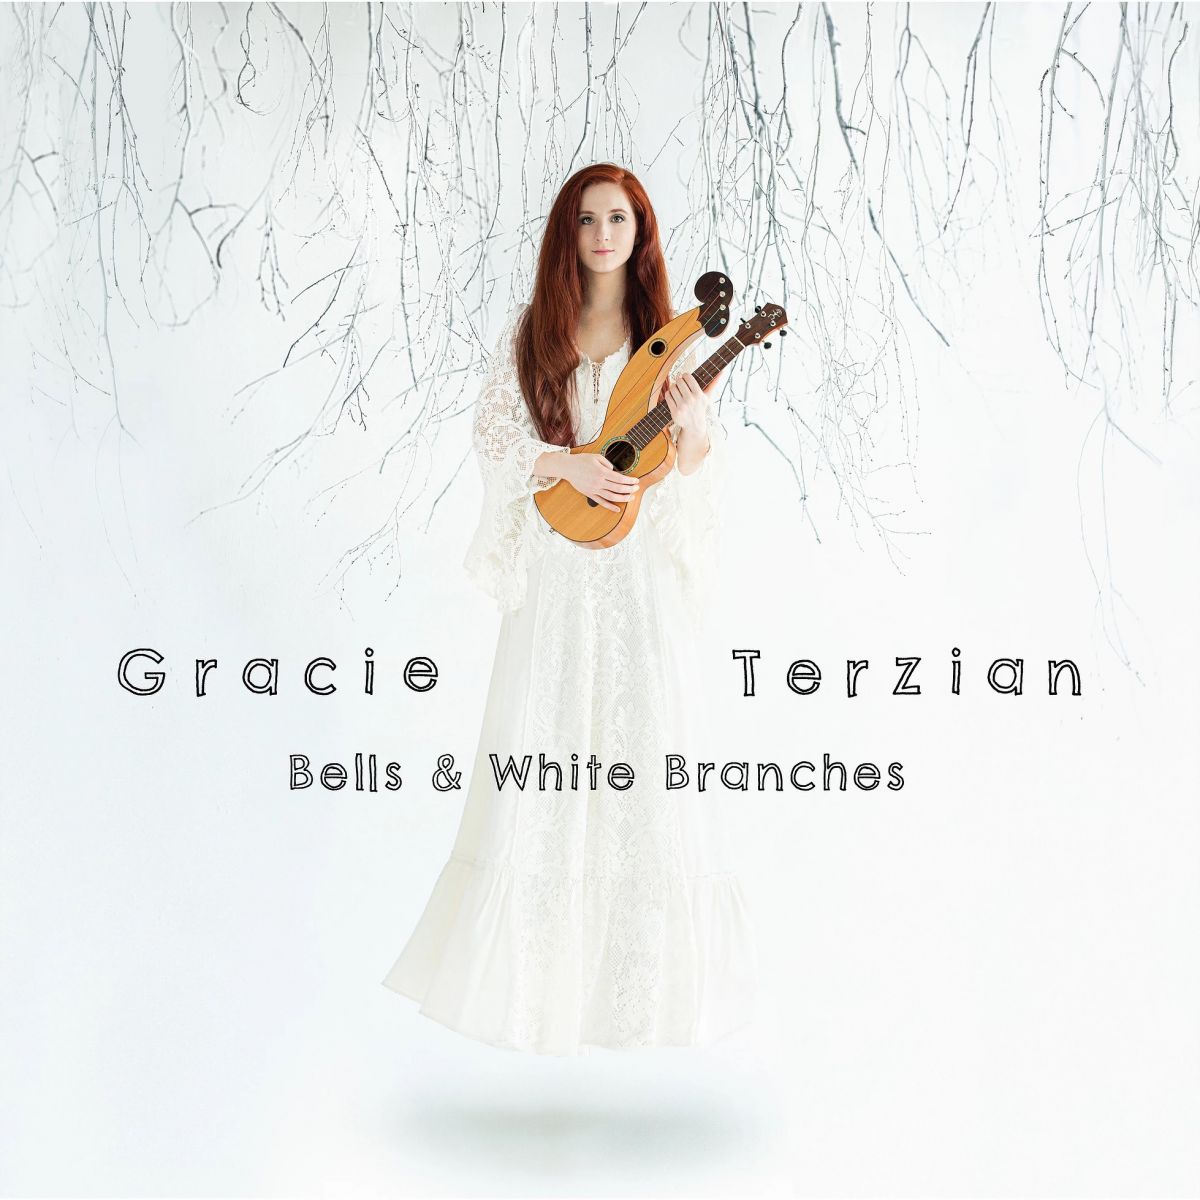 The album cover of “Bells & White Branches